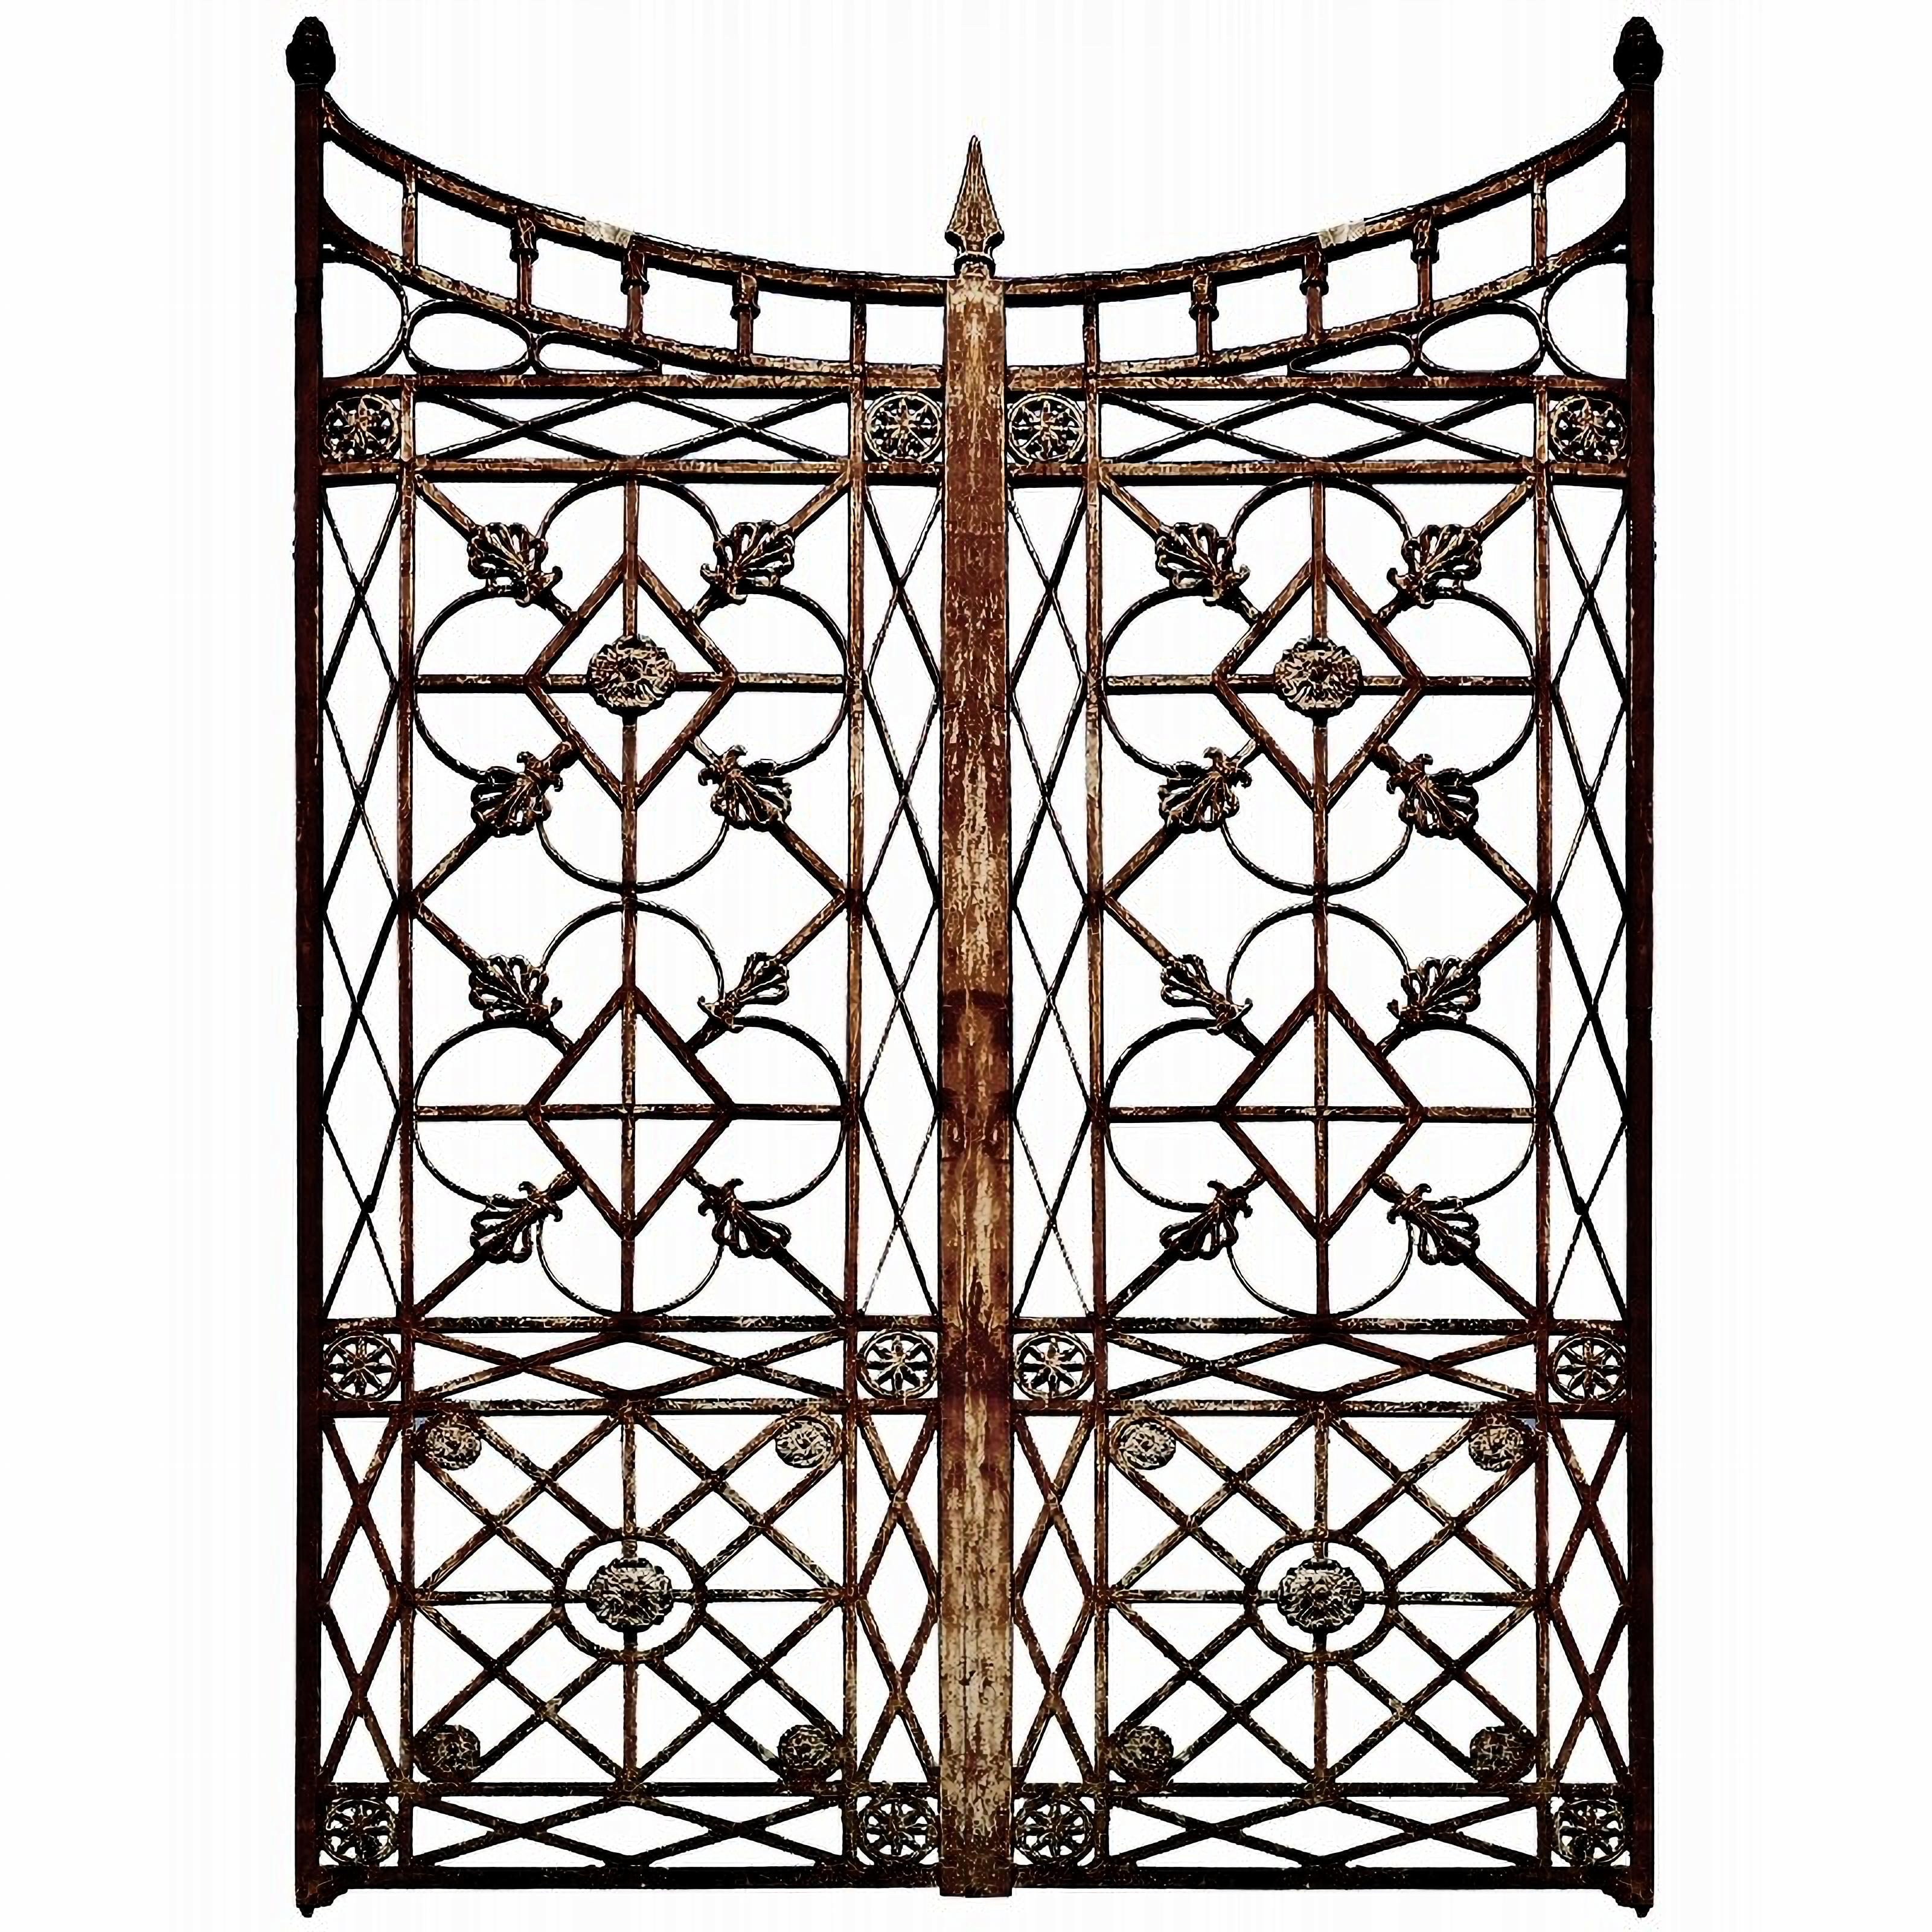 Art Deco ANTIQUE ITALIAN LIBERTY ART DECO CAST IRON AND IRON GATE Early 1900s For Sale